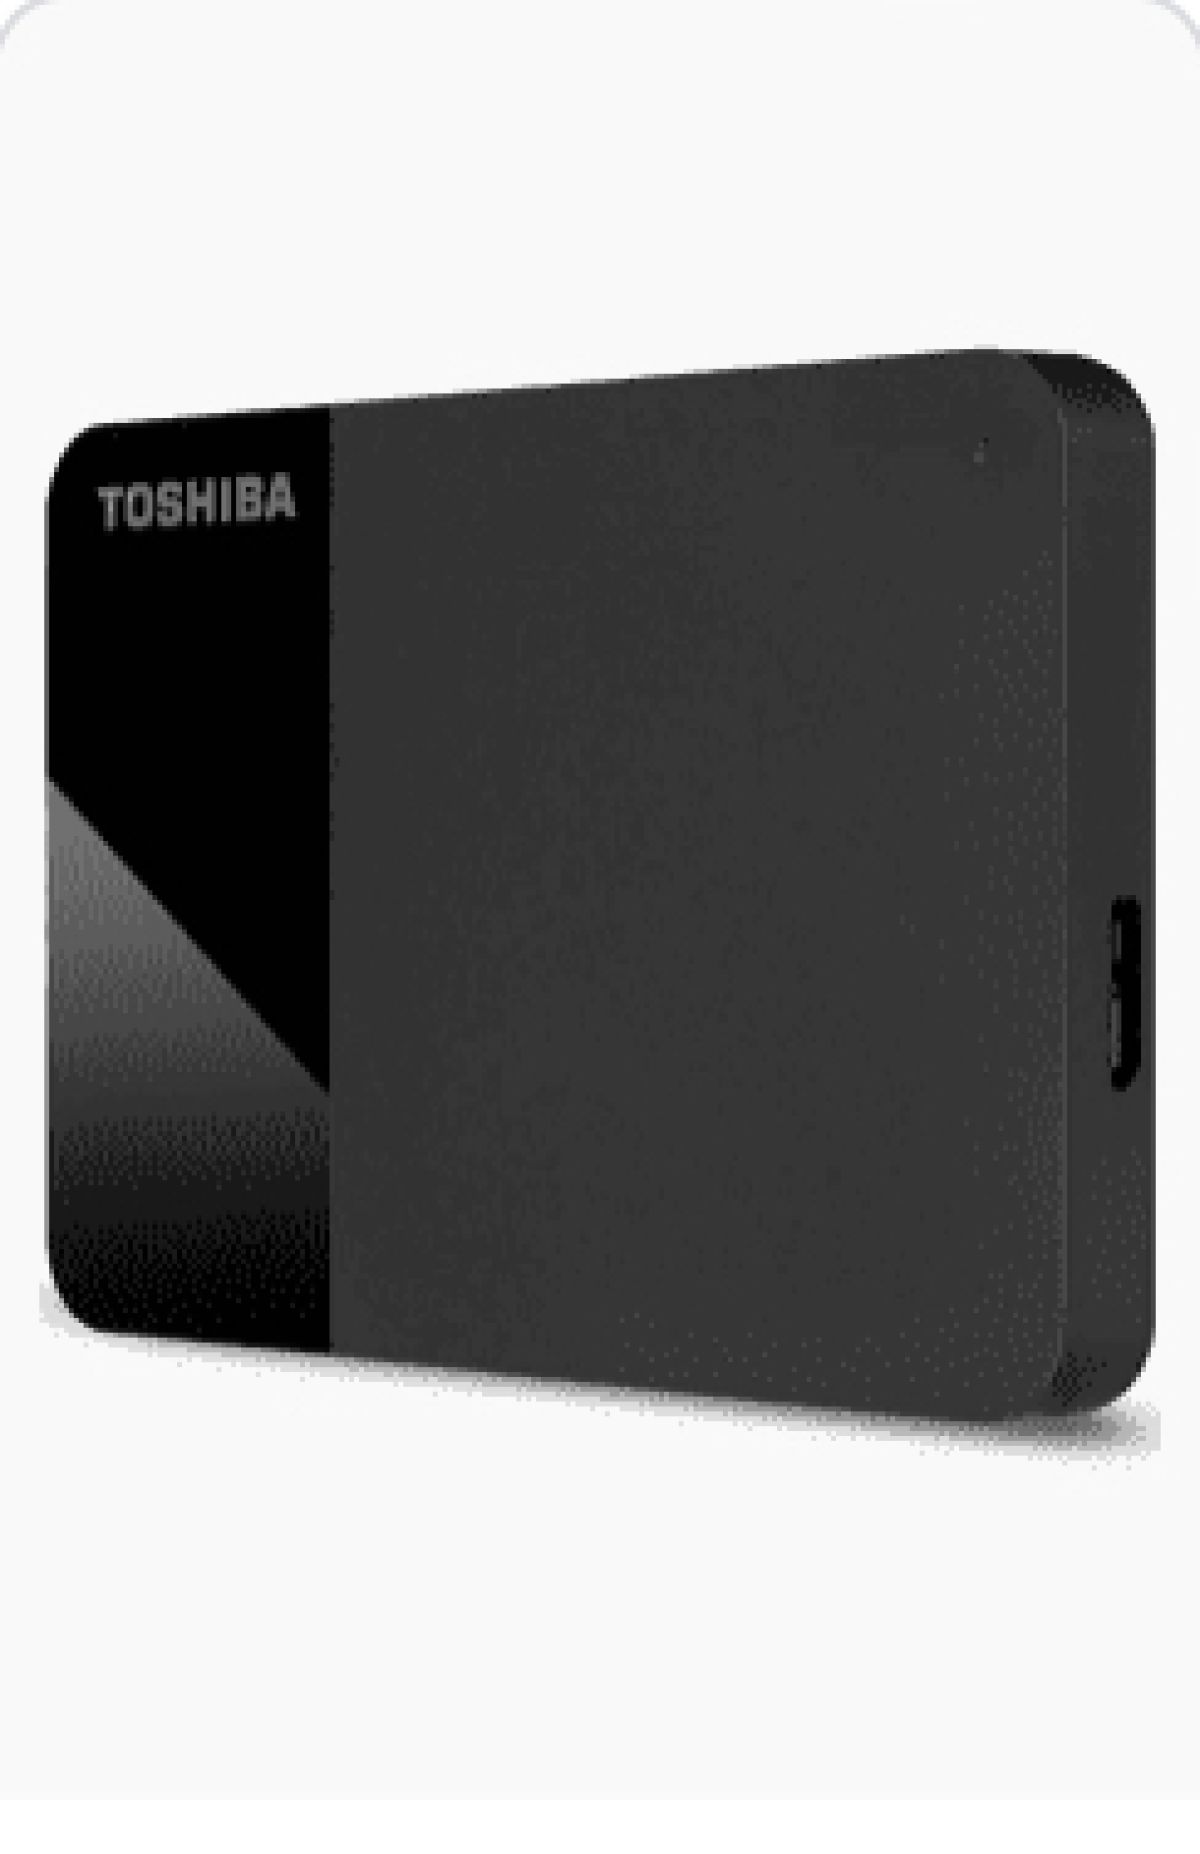 Toshiba DTB440 4To HDD Externe Noir